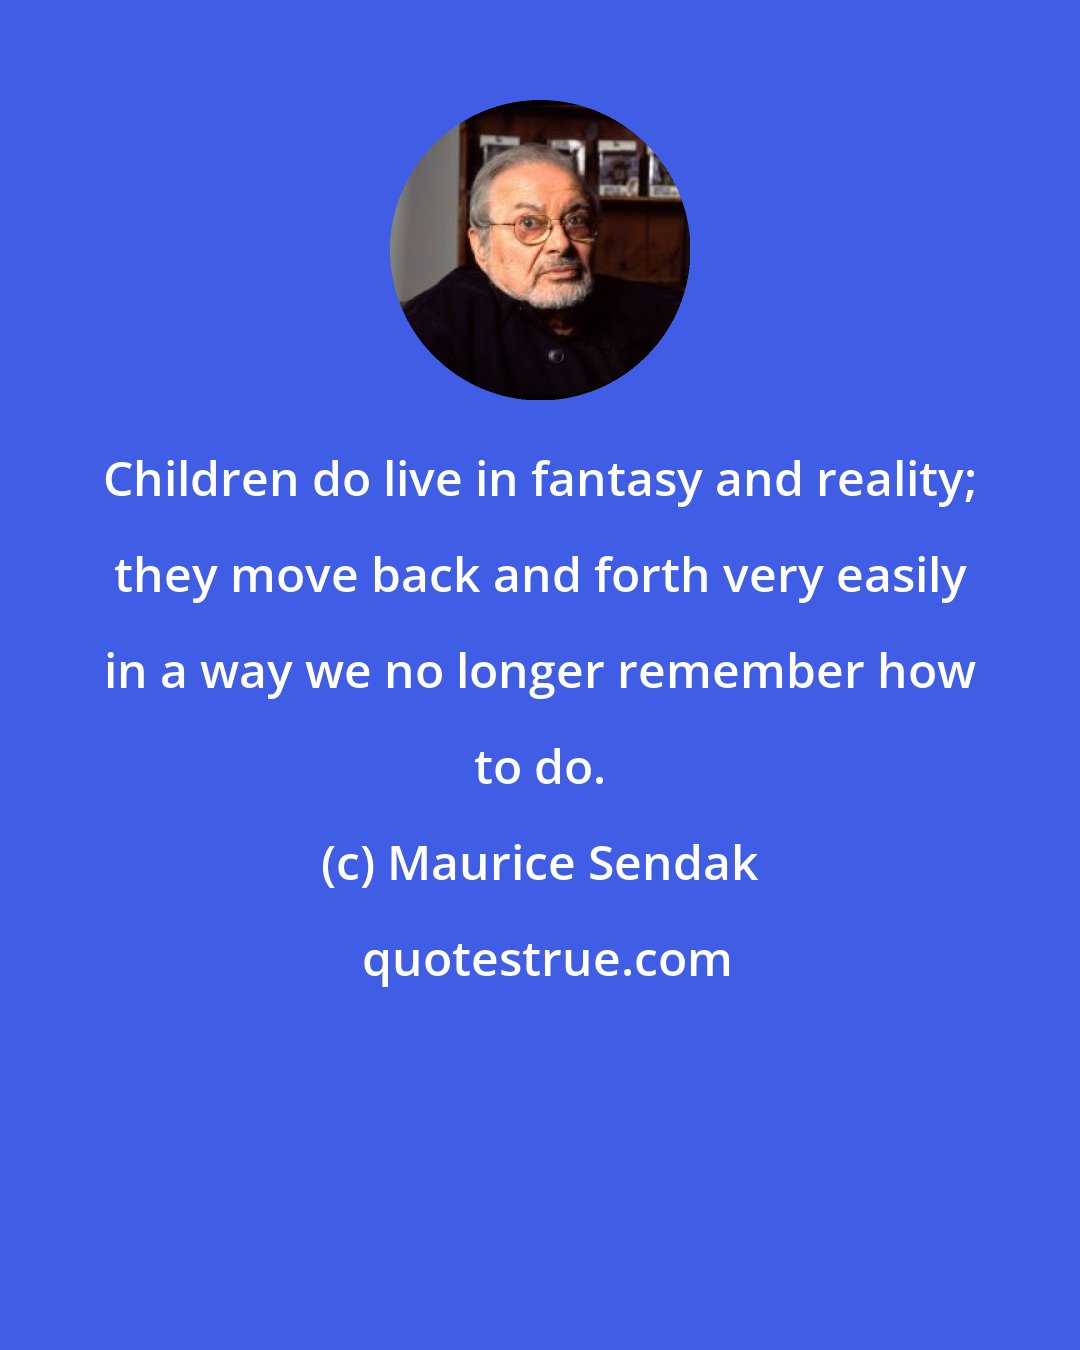 Maurice Sendak: Children do live in fantasy and reality; they move back and forth very easily in a way we no longer remember how to do.